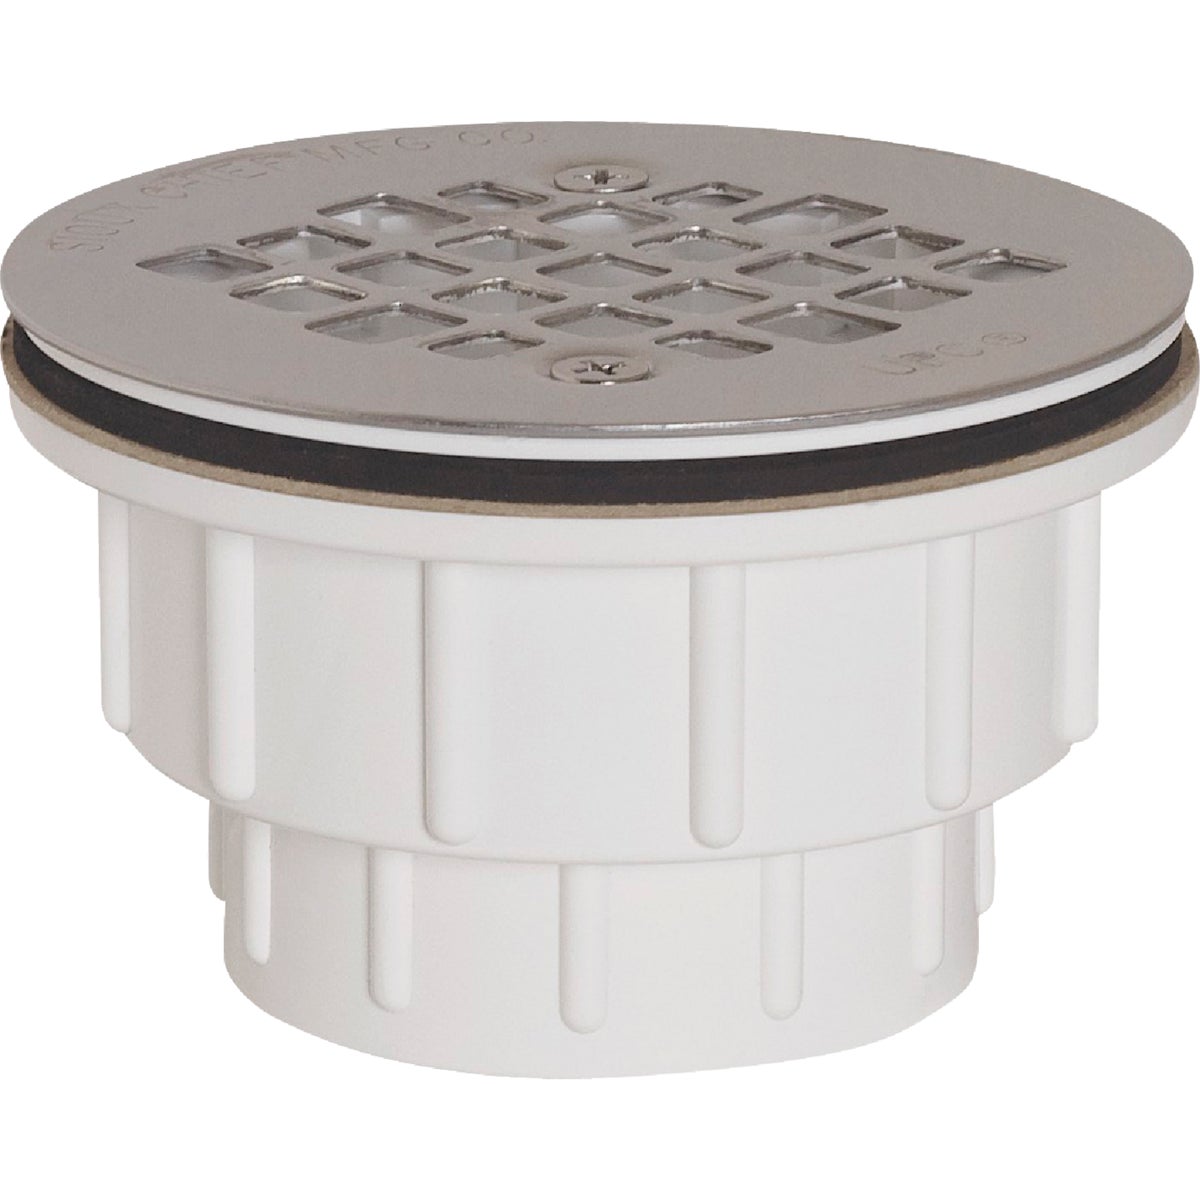 Sioux Chief 2 In. PVC Solvent Weld Shower Drain with 4-1/4 In. Stainless Steel Strainer